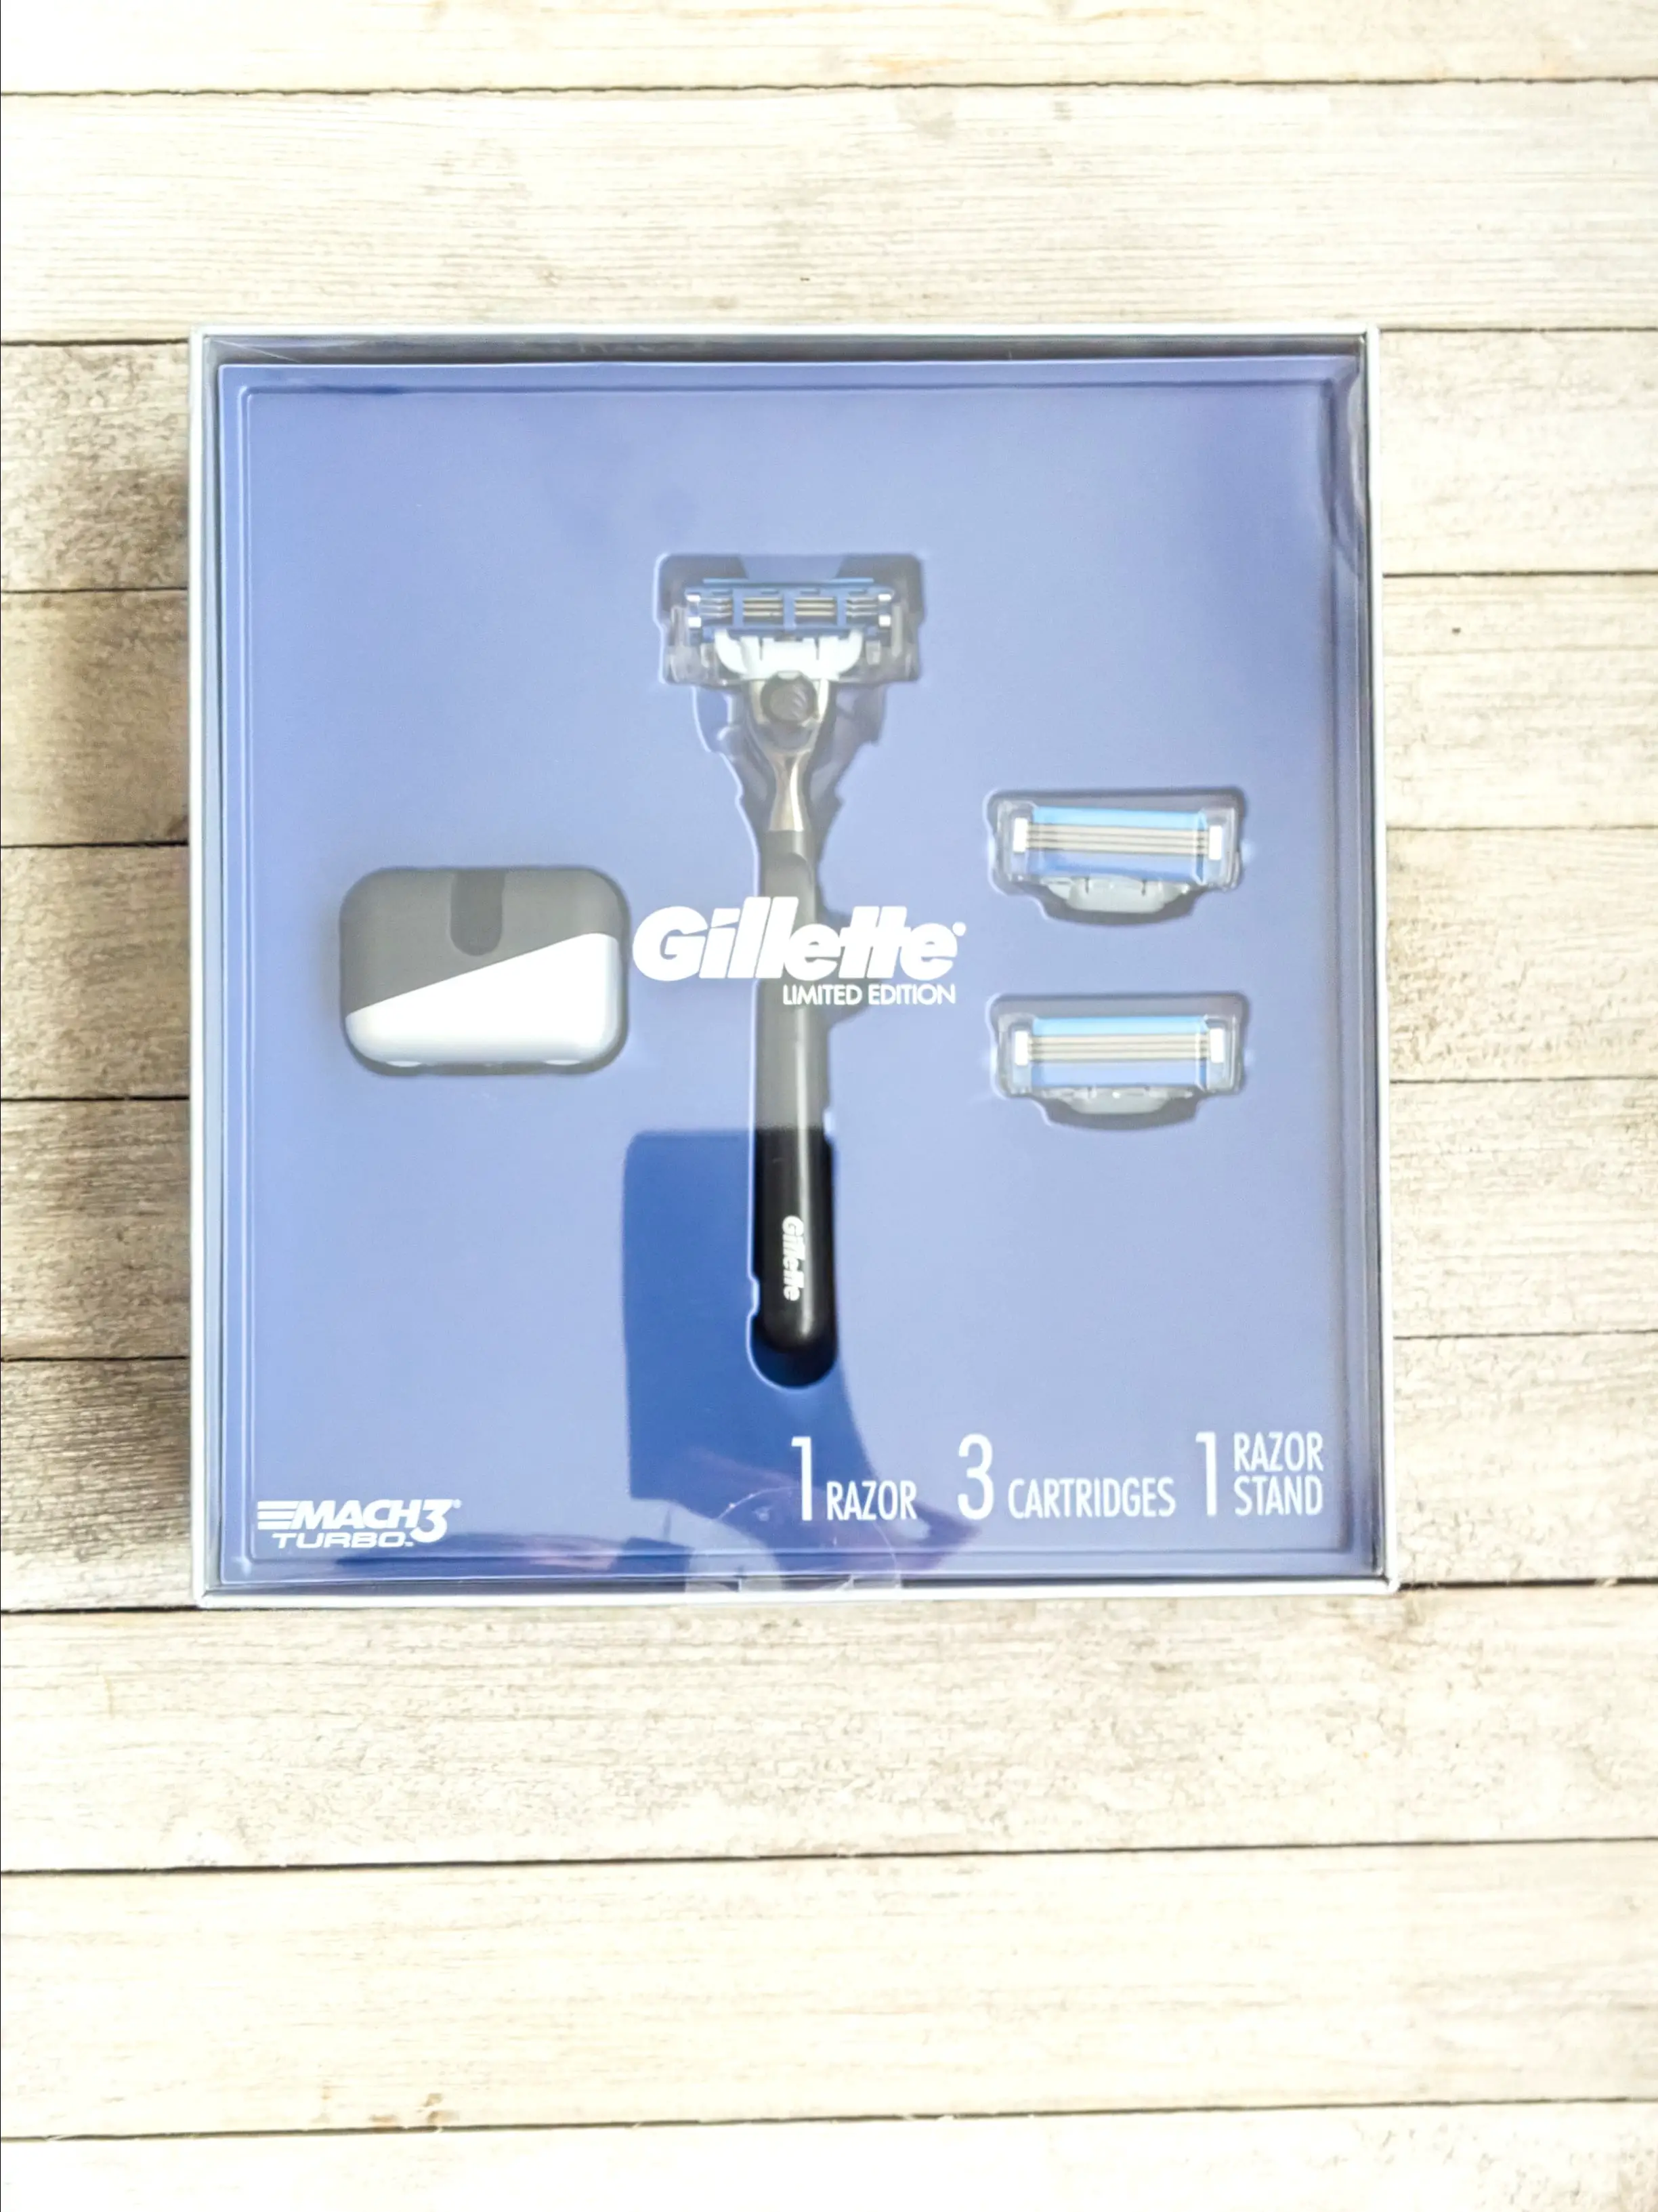 Gillette Limited Edition Holiday Gift Pack